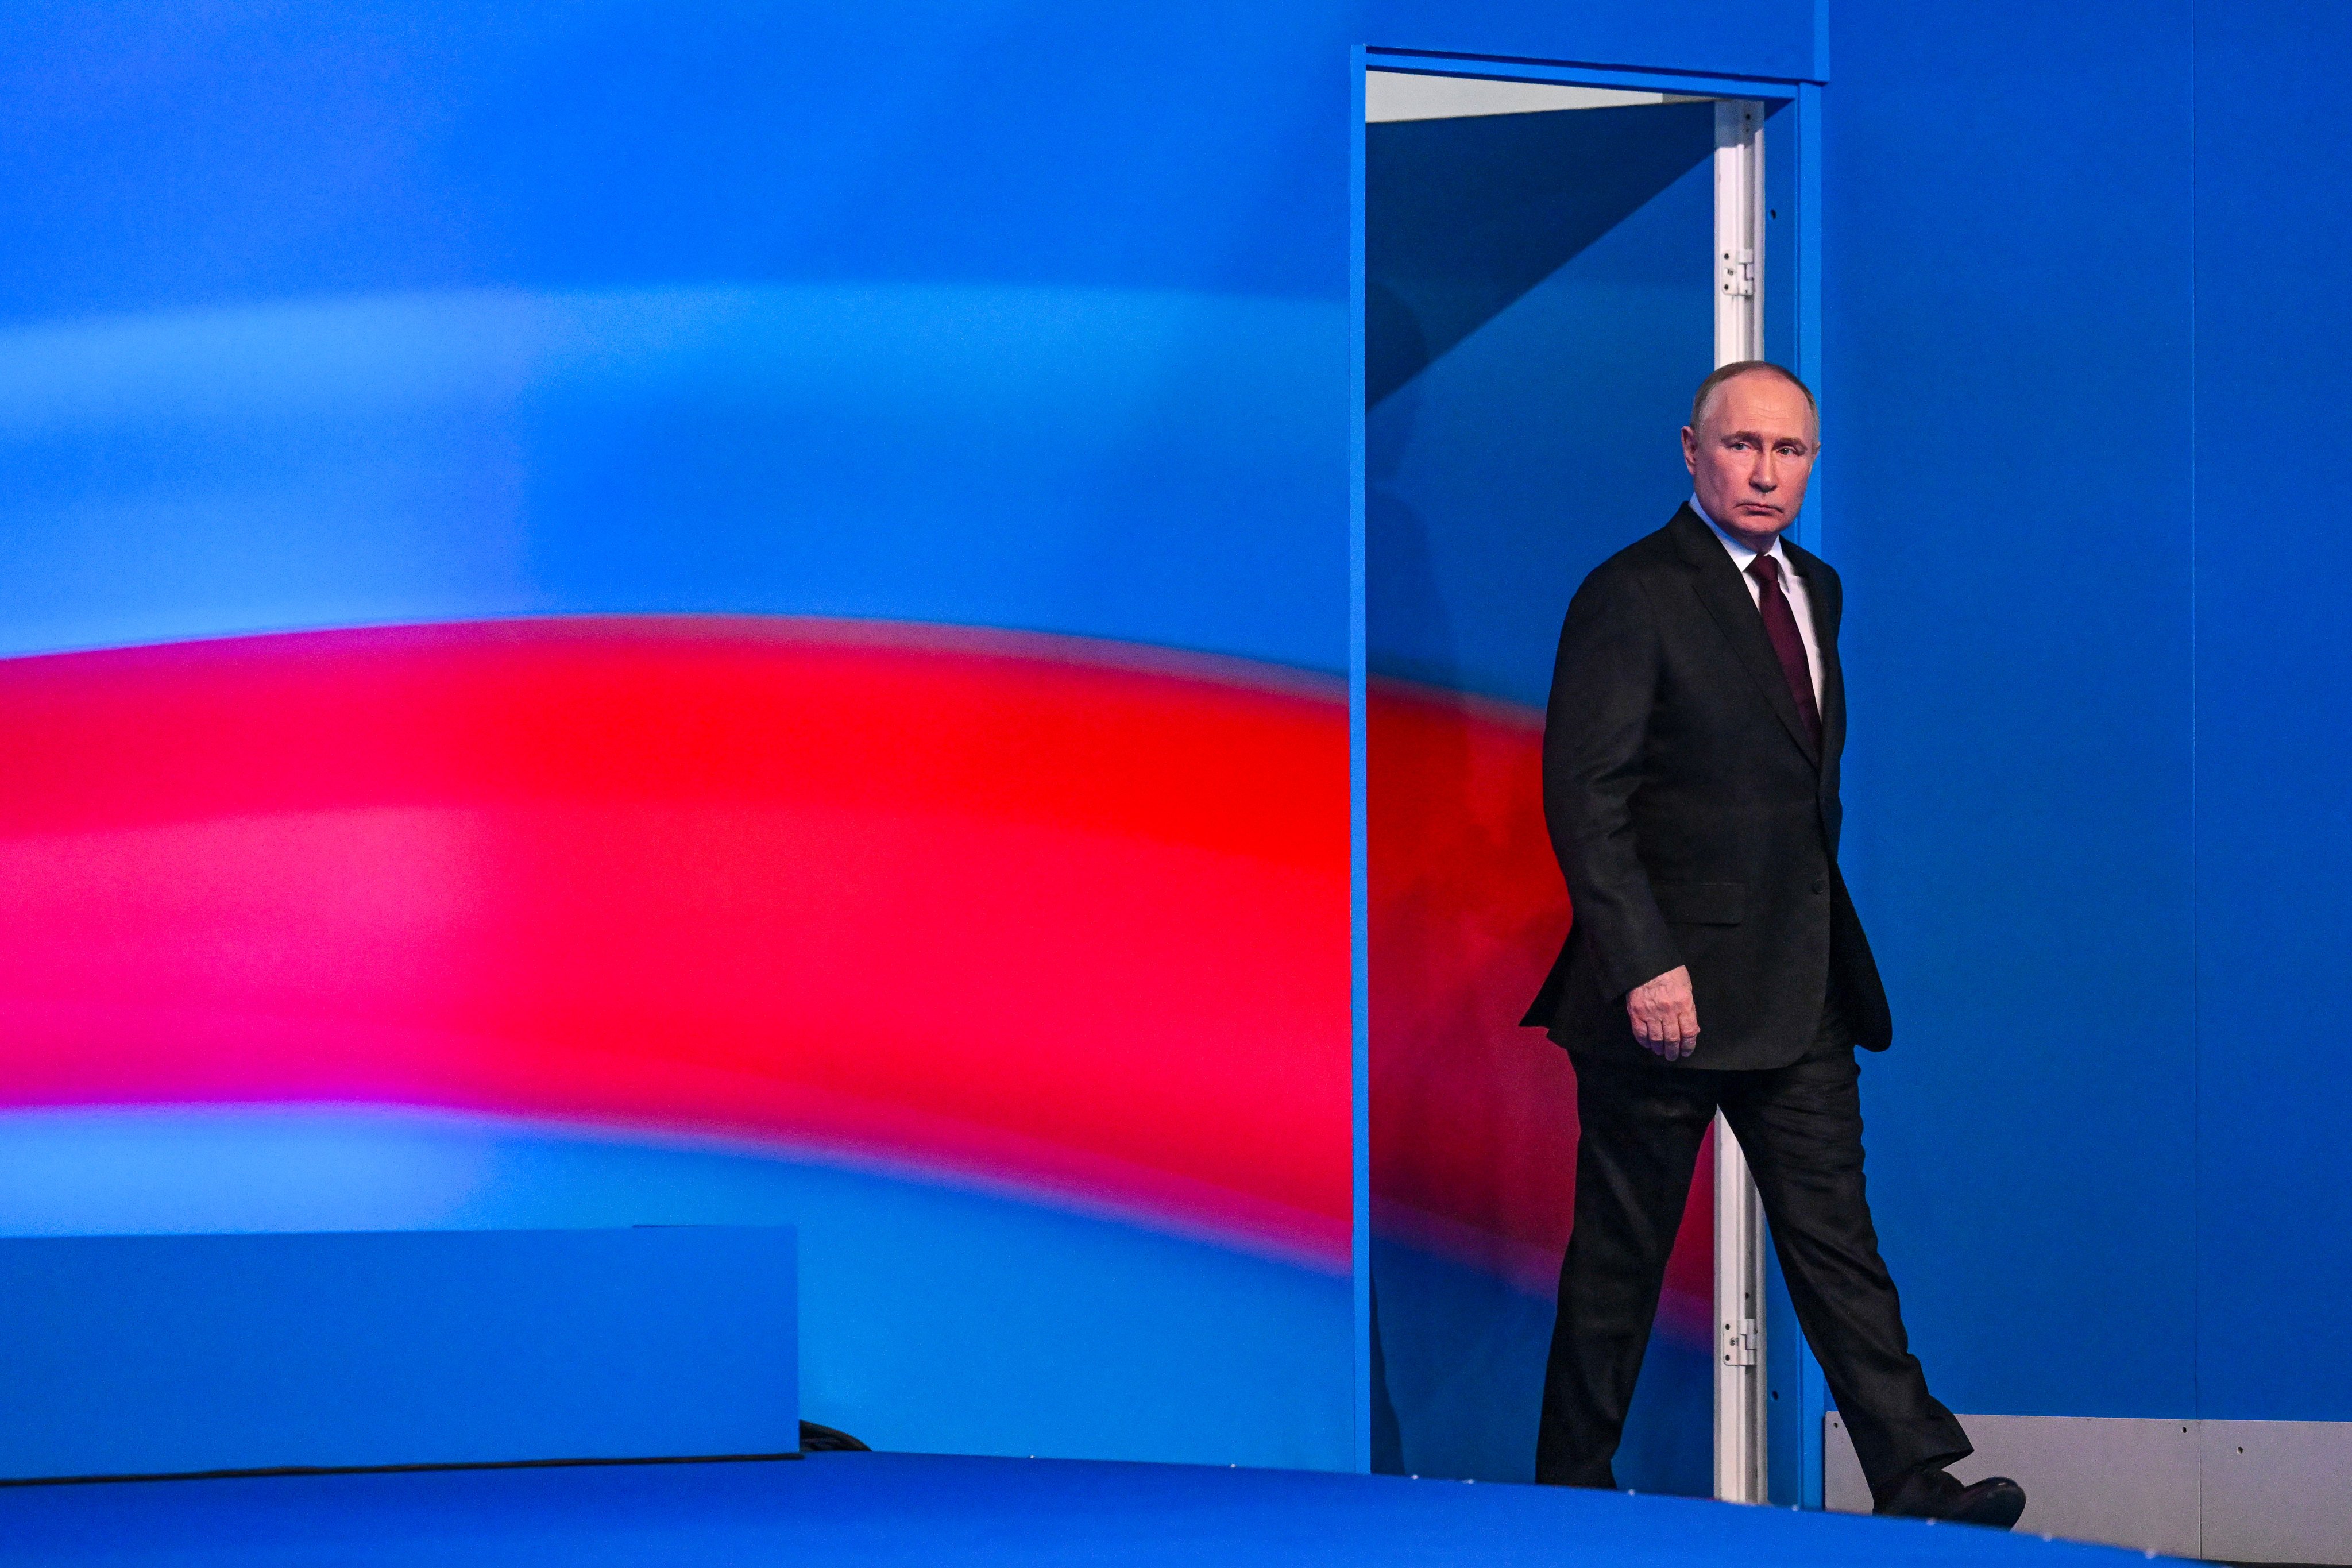 Vladimir Putin’s win in Russia’s presidential election heralds deeper ties with China, observers say. Photo: EPA-EFE